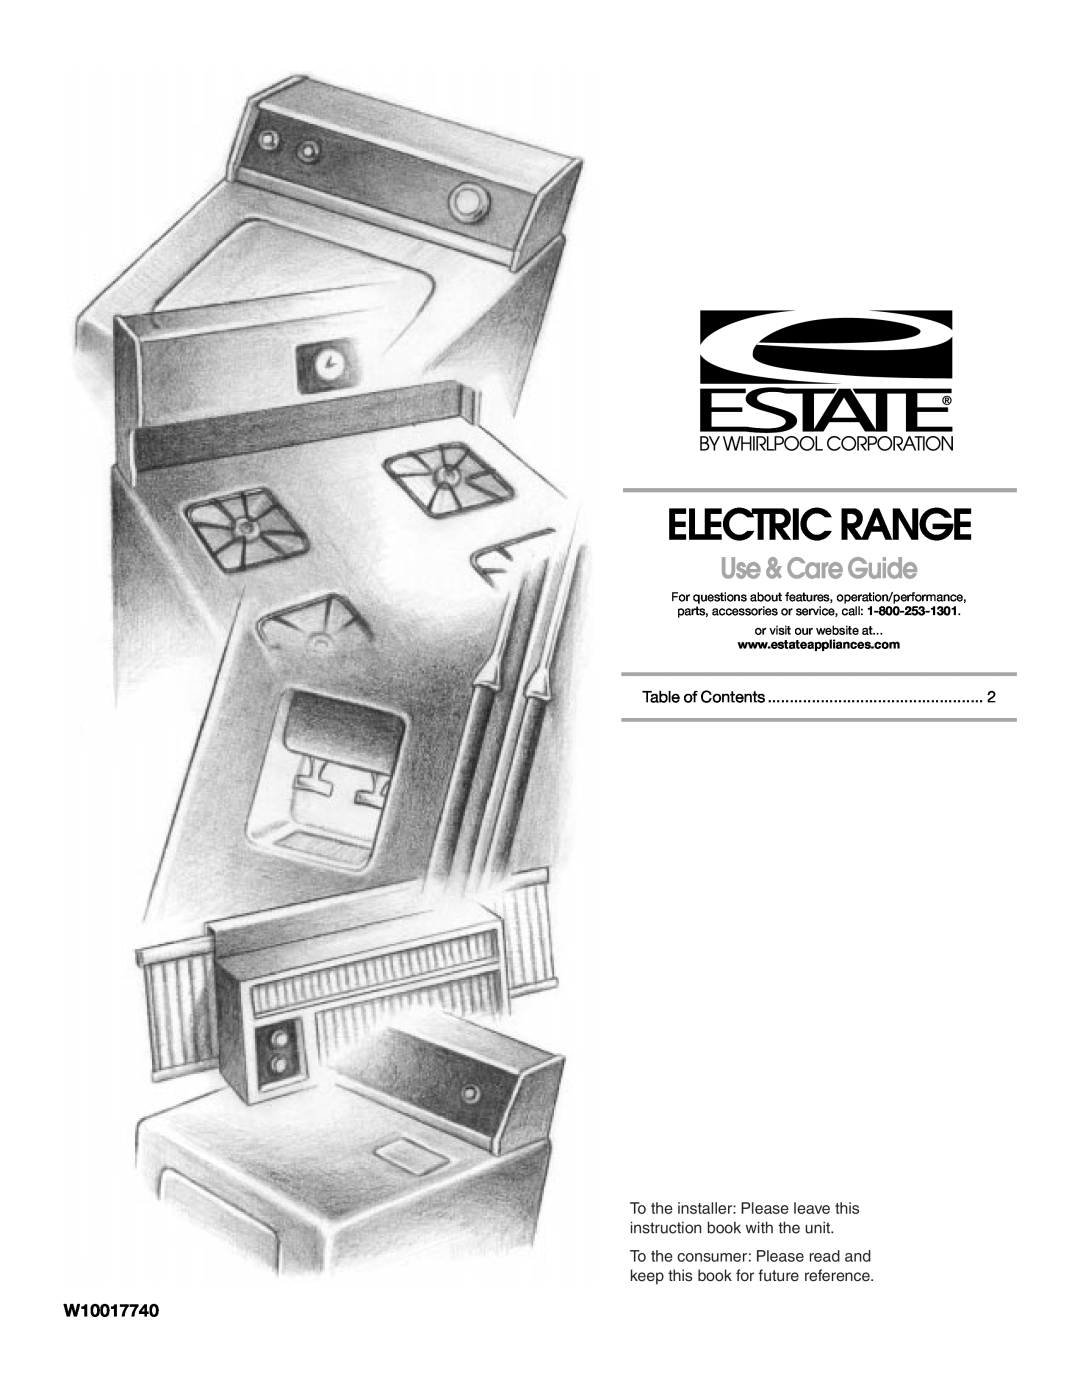 Estate W10017740 manual Electric Range, Use & Care Guide, or visit our website at 